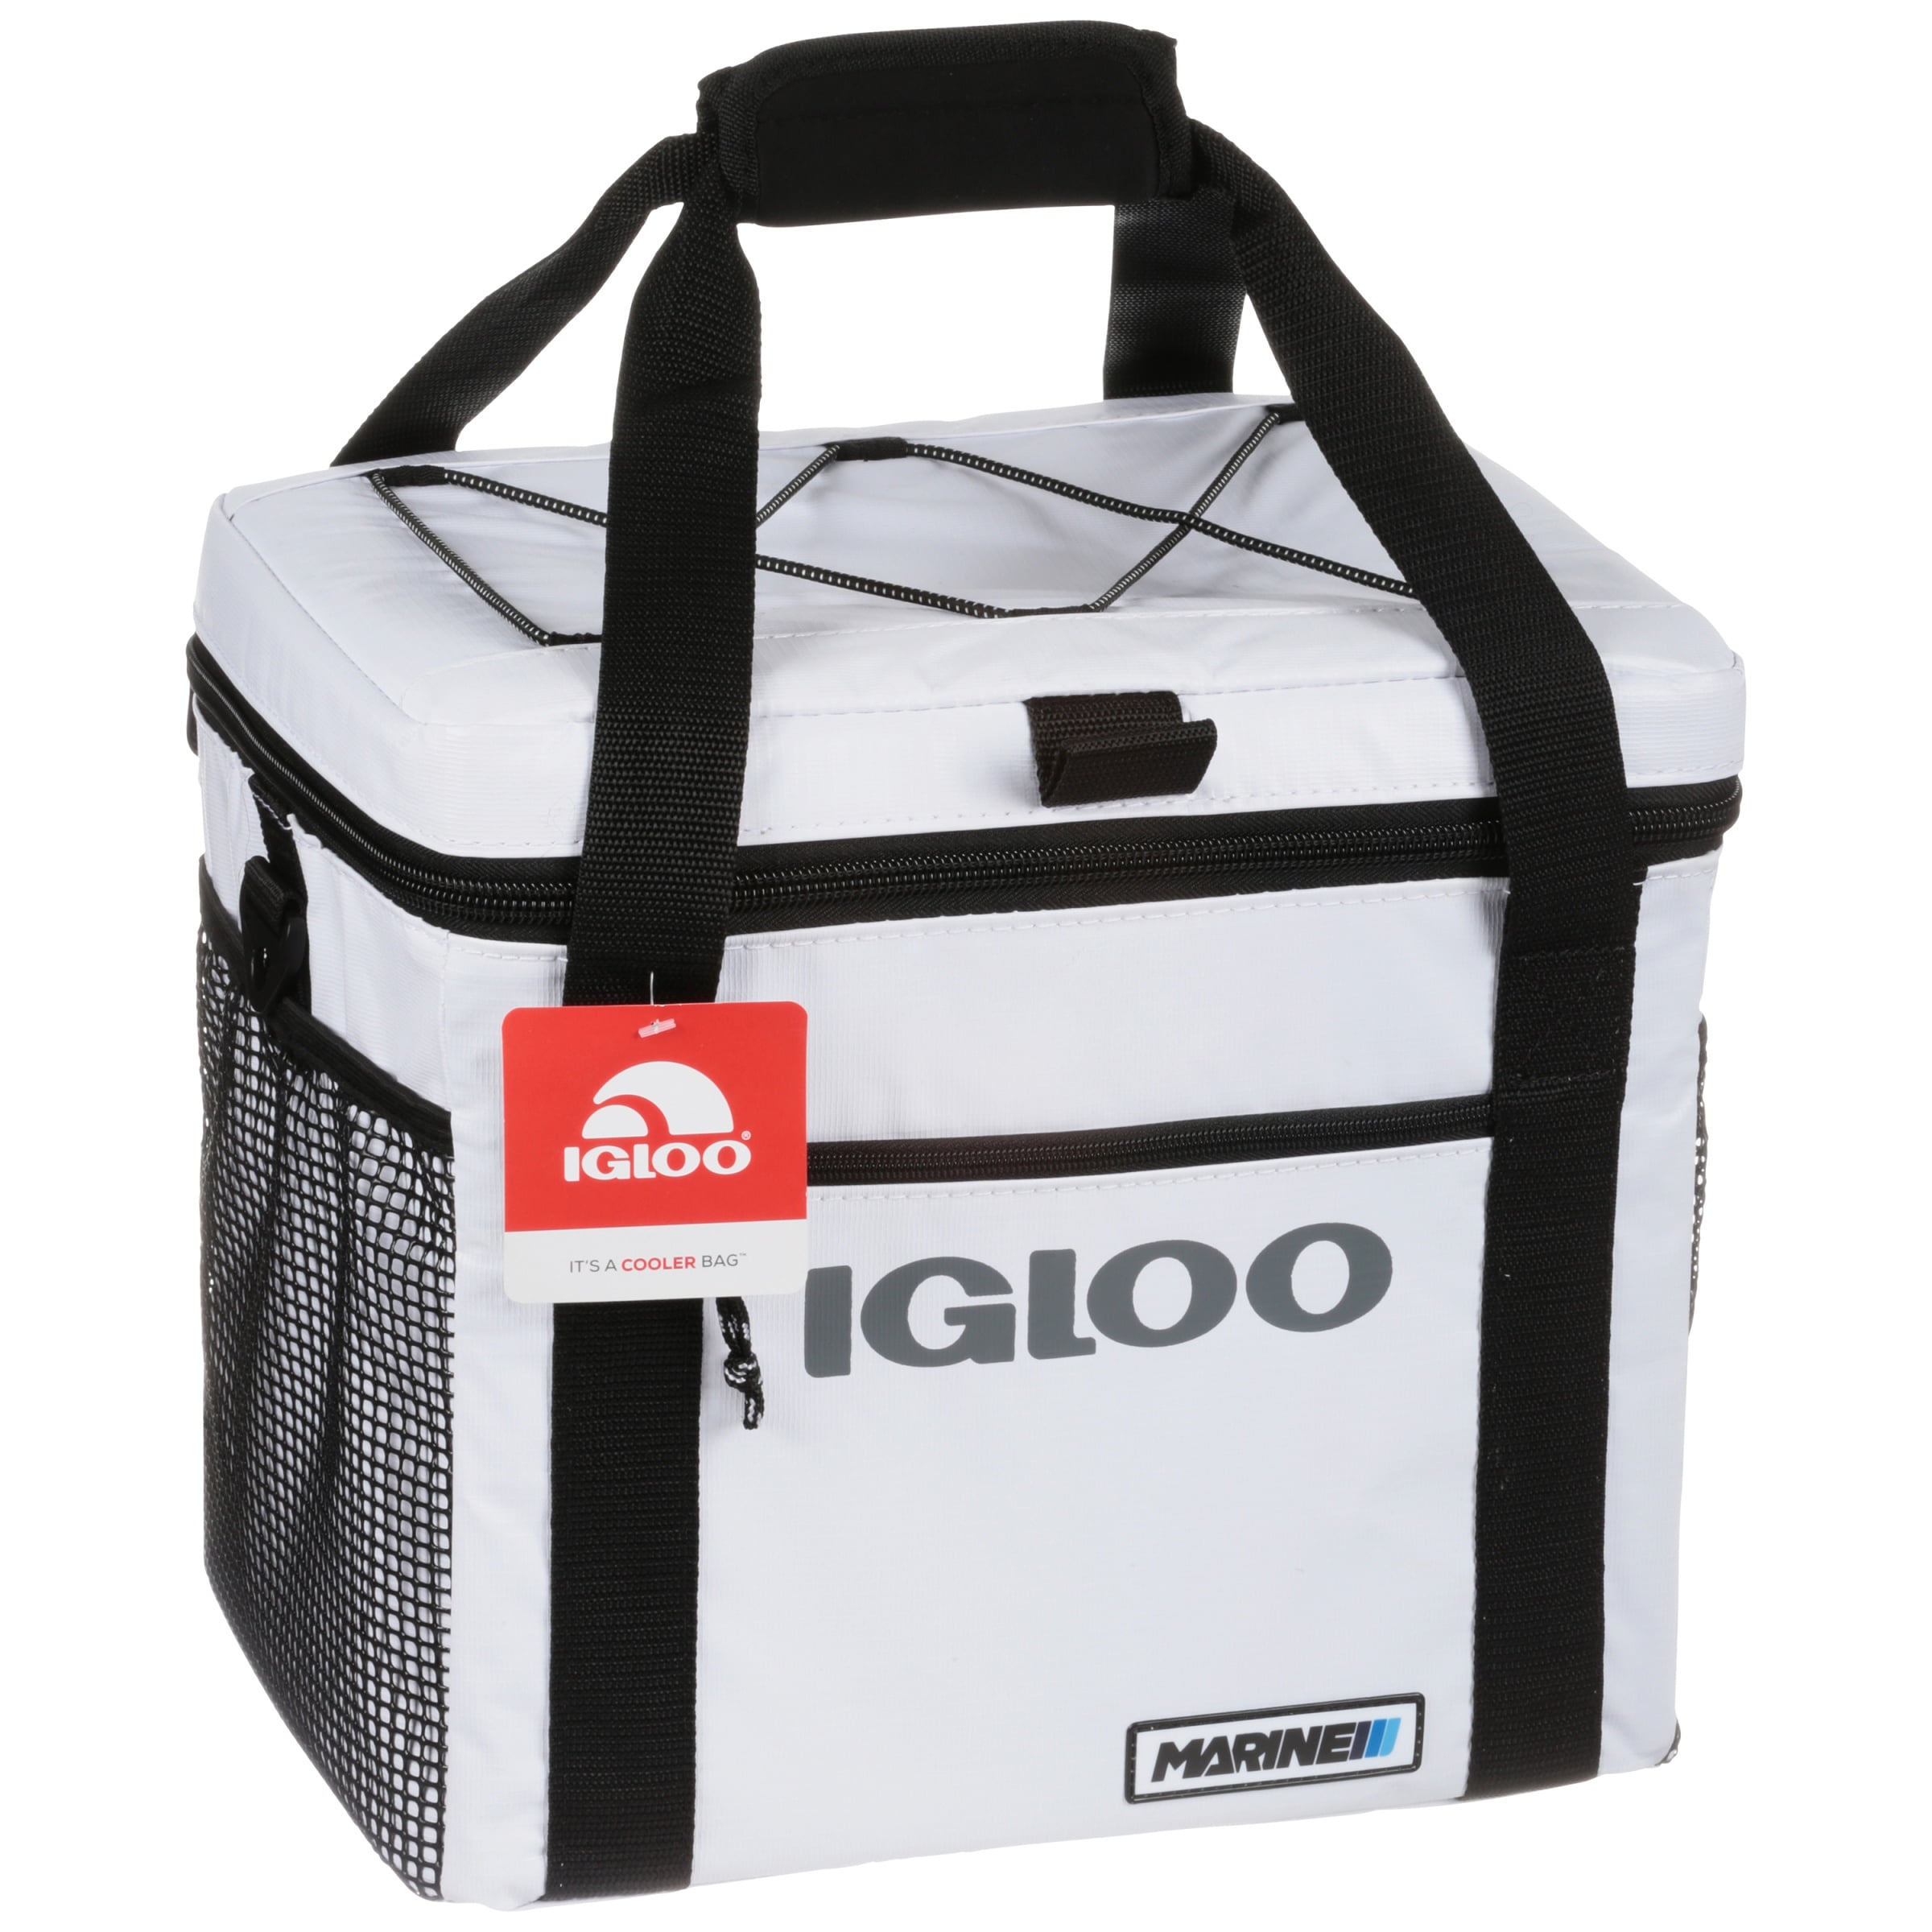 Igloo Ultra Thick Cooler Bag Cheap Online